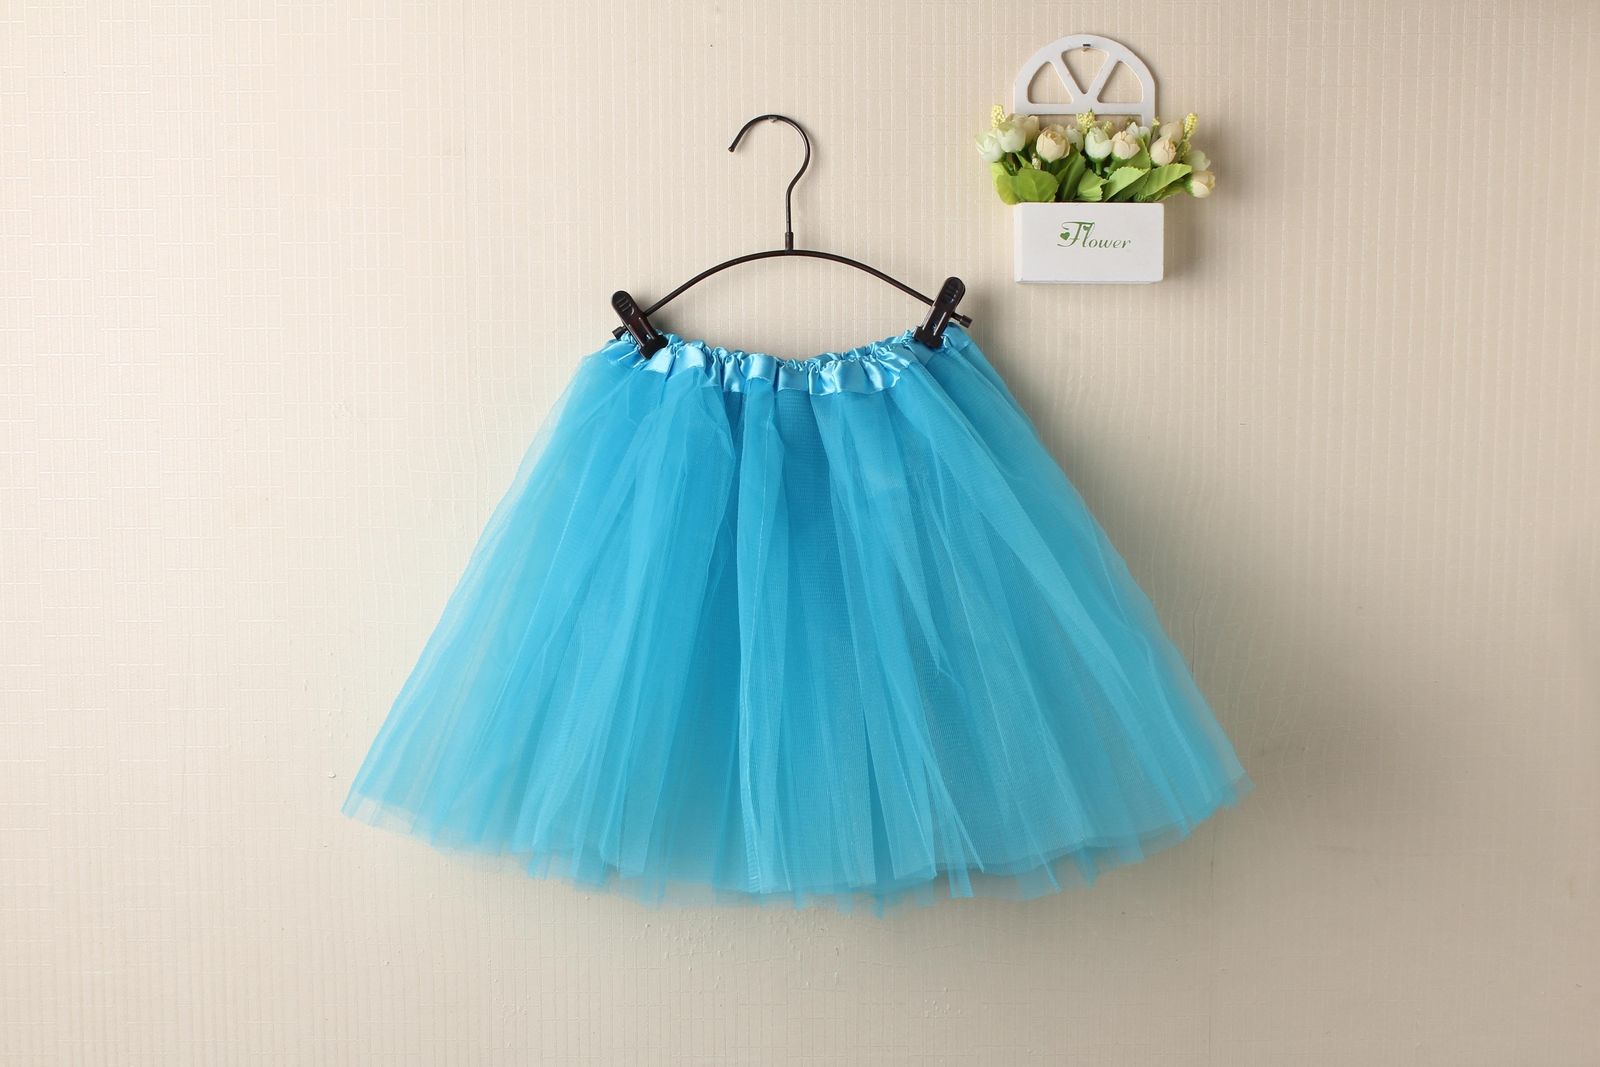 New Adults Tulle Tutu Skirt Dressup Party Costume Ballet Womens Girls Dance Wear, Blue, Adults